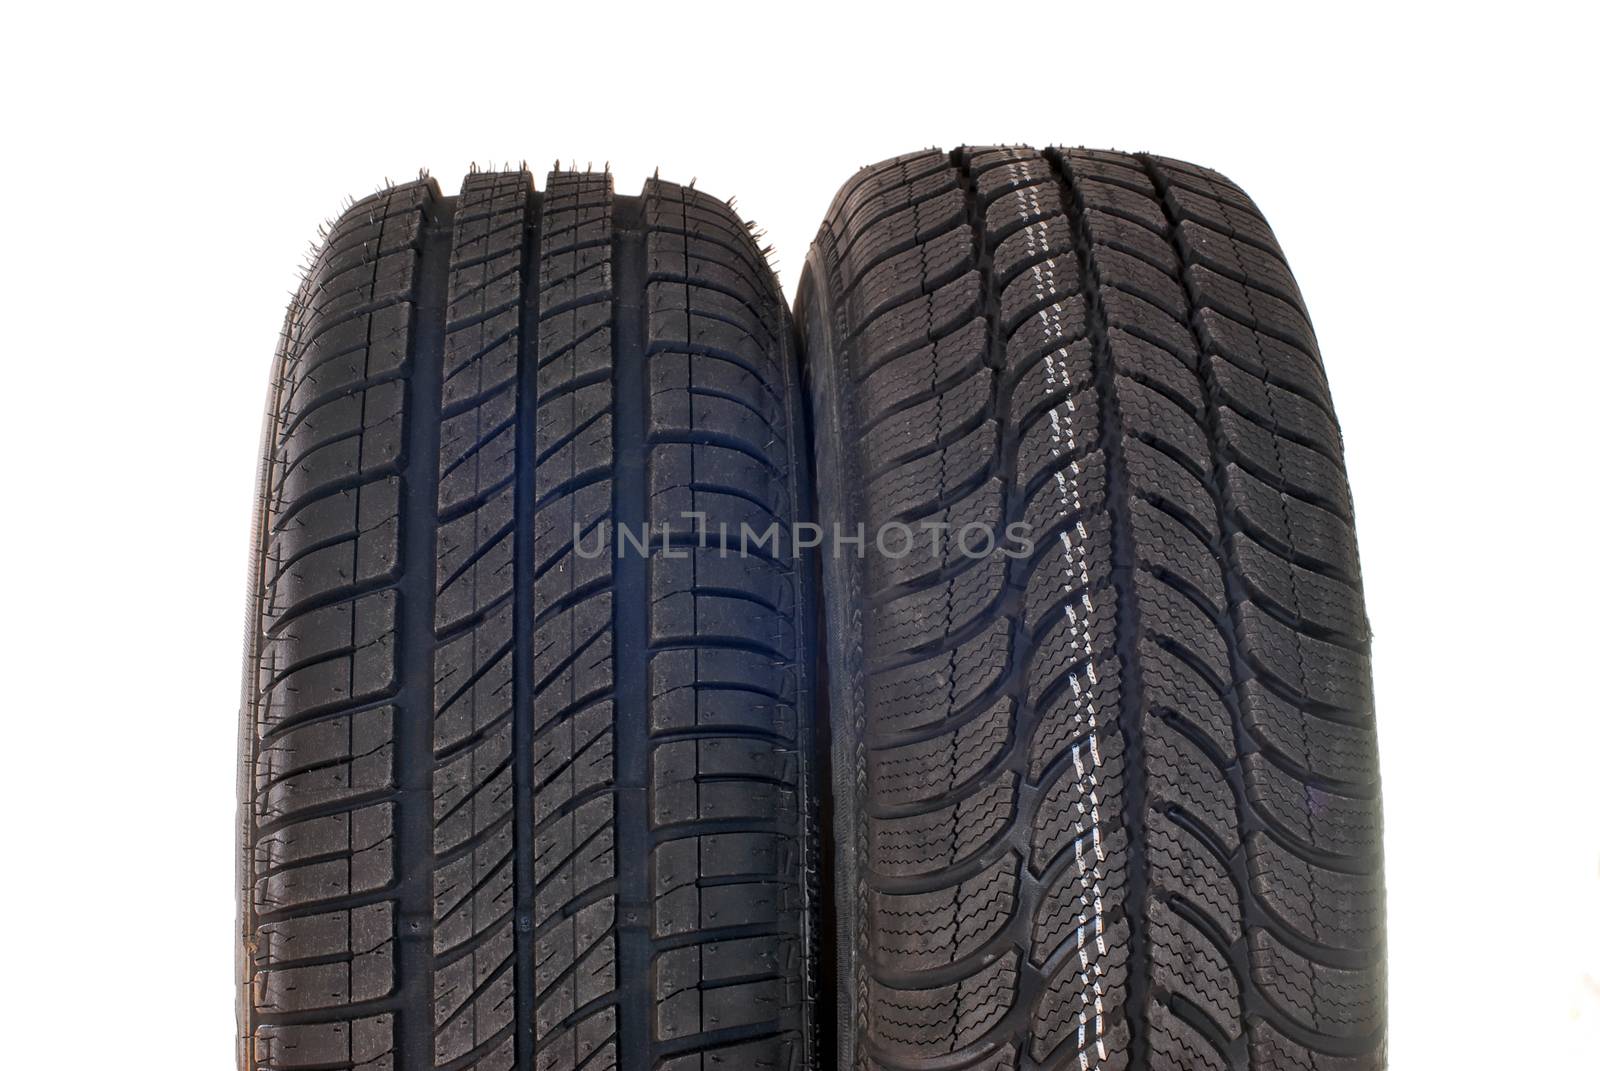 Brand new modern summer and winter car tires